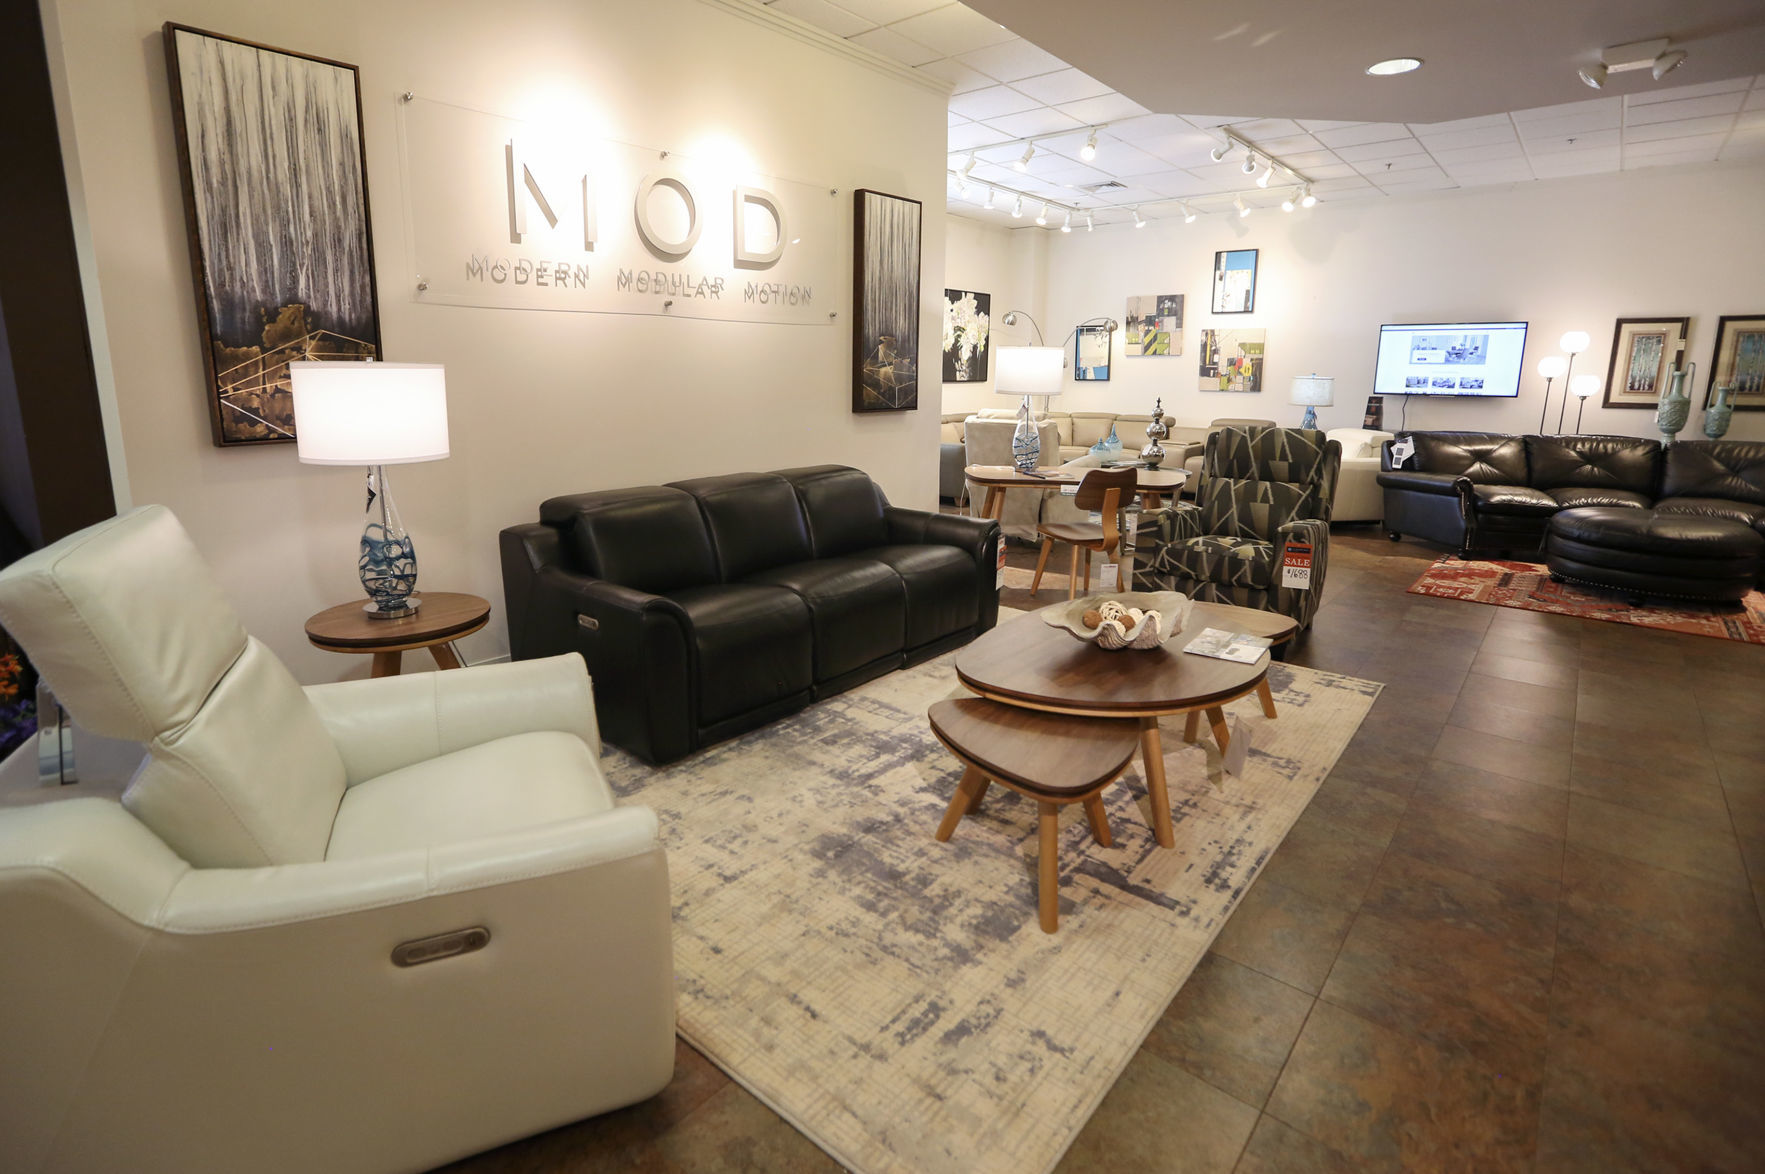 A new furniture gallery at FloorShow Furniture & Flooring in Dubuque on Friday, Oct. 4, 2019. FloorShow will have a branding change on Monday, when the company will officially become known as Home + Floor Show. PHOTO CREDIT: NICKI KOHL